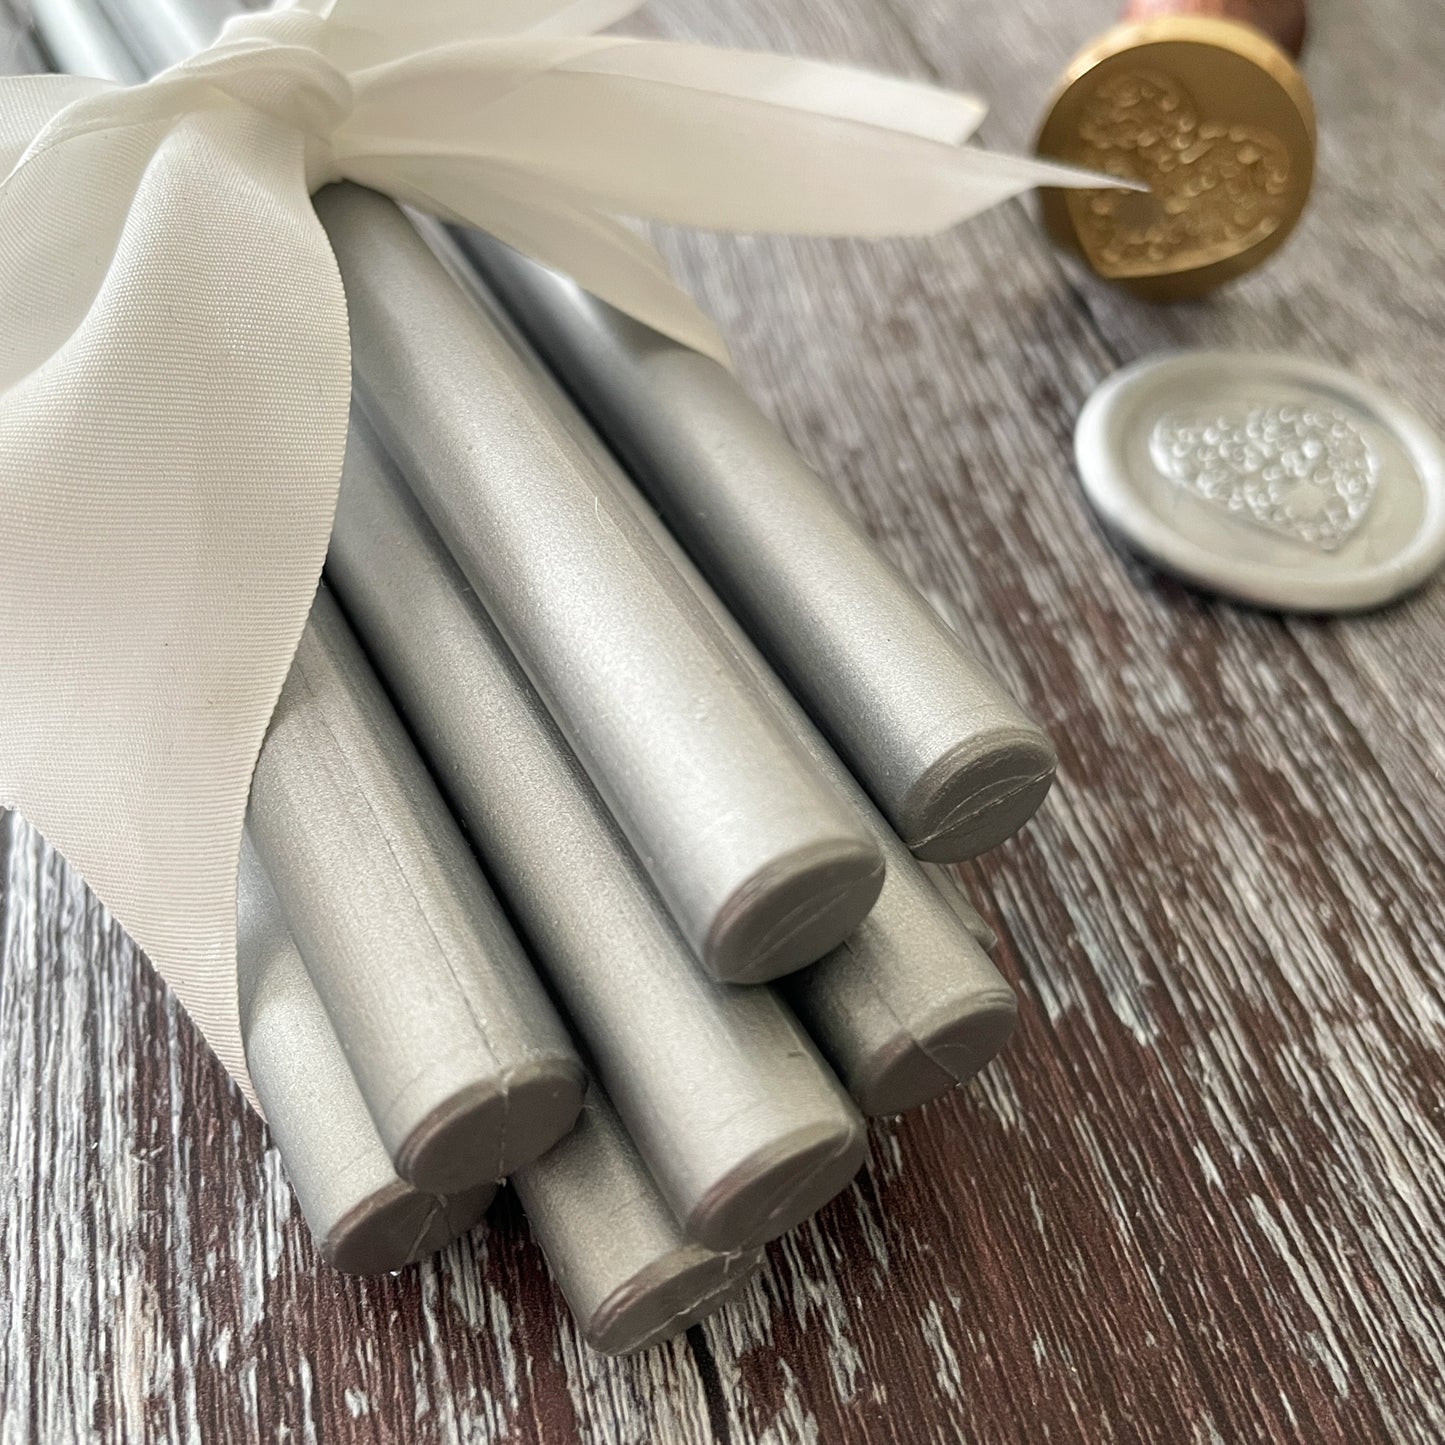 Eco friendly sealing wax sticks in metallic silver.  11mm glue gun sealing wax that can also be used with a melting spoon. Plastic free, Paraffin free and Biodegradable.  Make silver wax seals for decorating invitations, stationery, envelopes, packaging and more.  By The Natural Paper Company